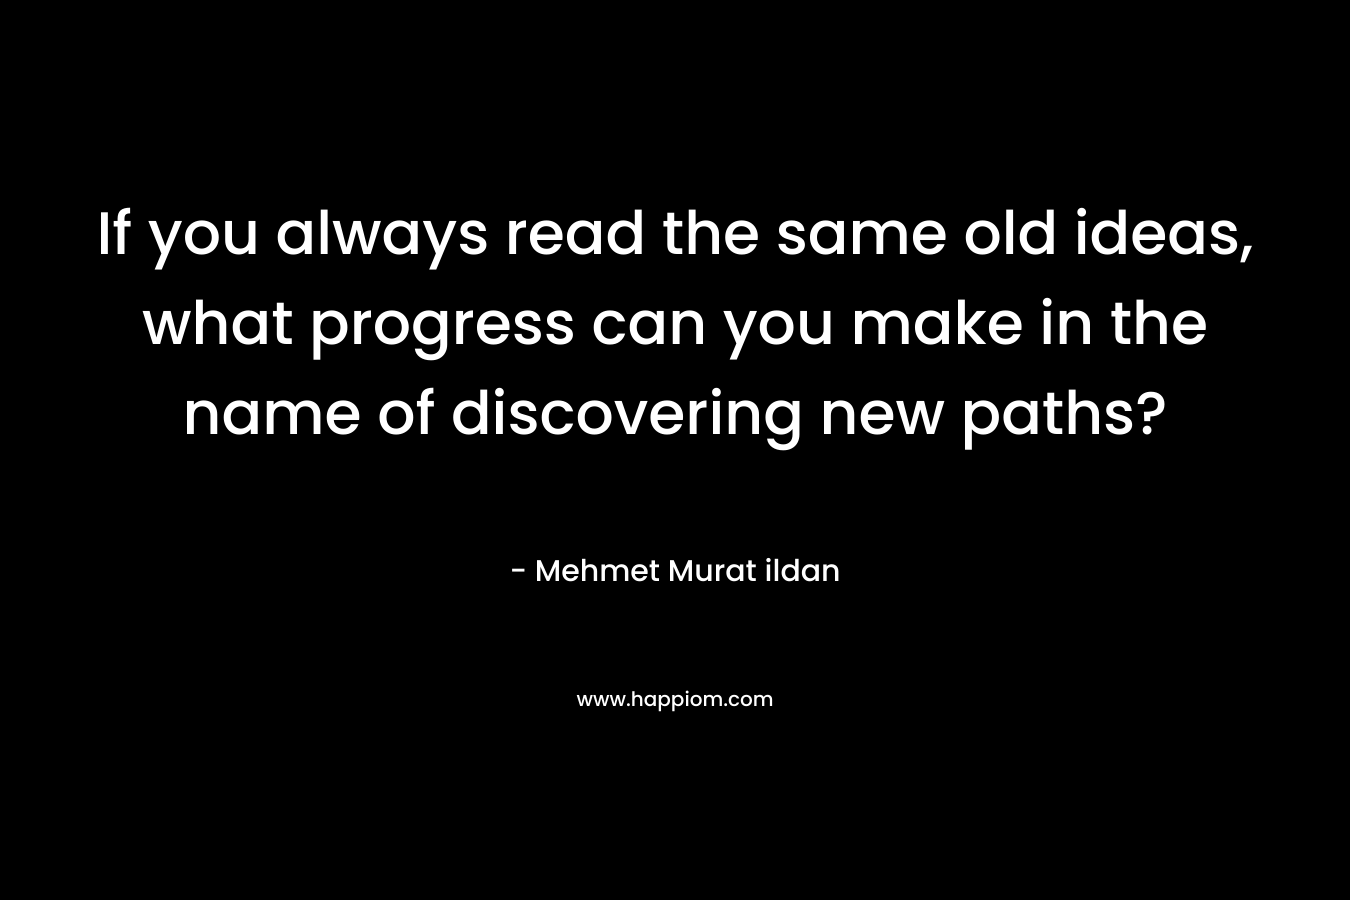 If you always read the same old ideas, what progress can you make in the name of discovering new paths?